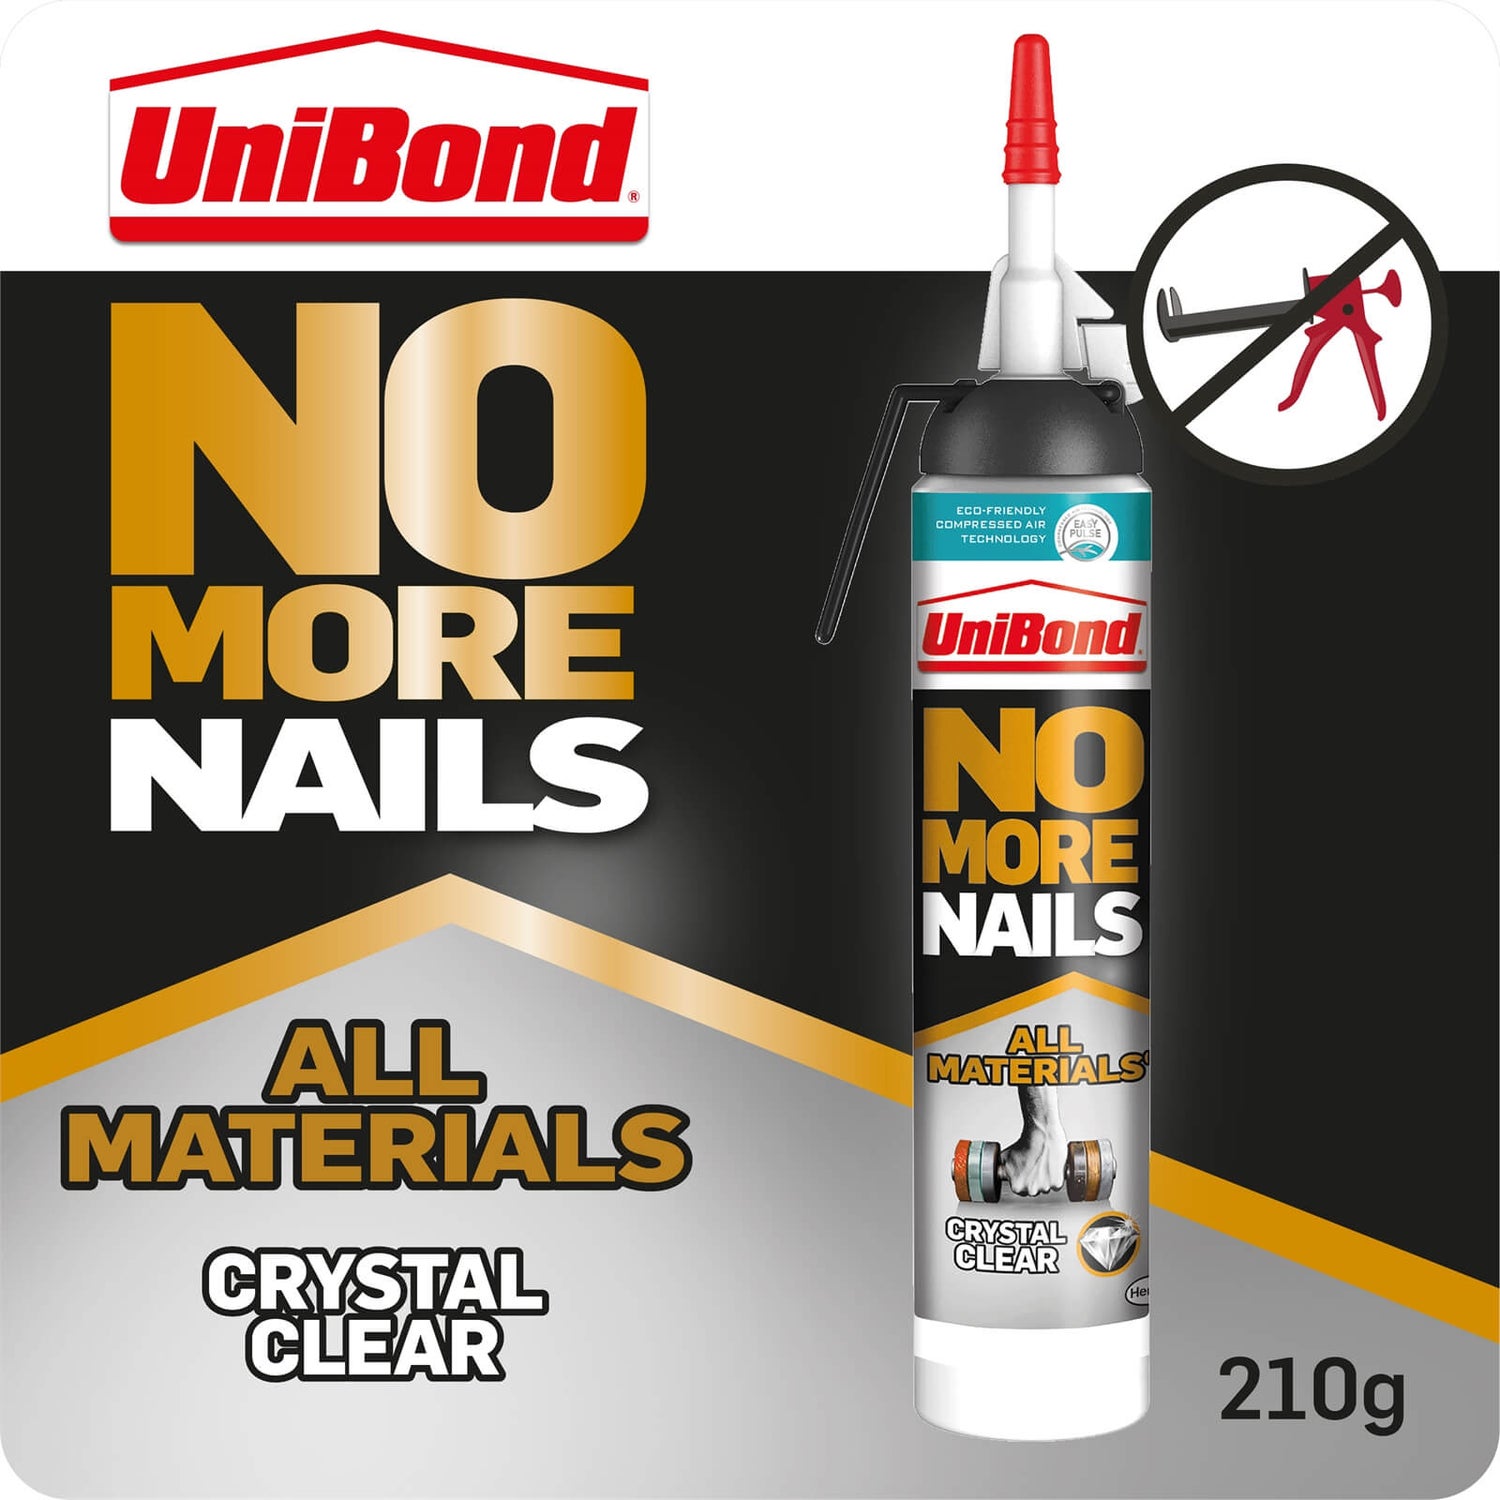 HOW TO USE BOSTIK NO MORE NAILS - YouTube